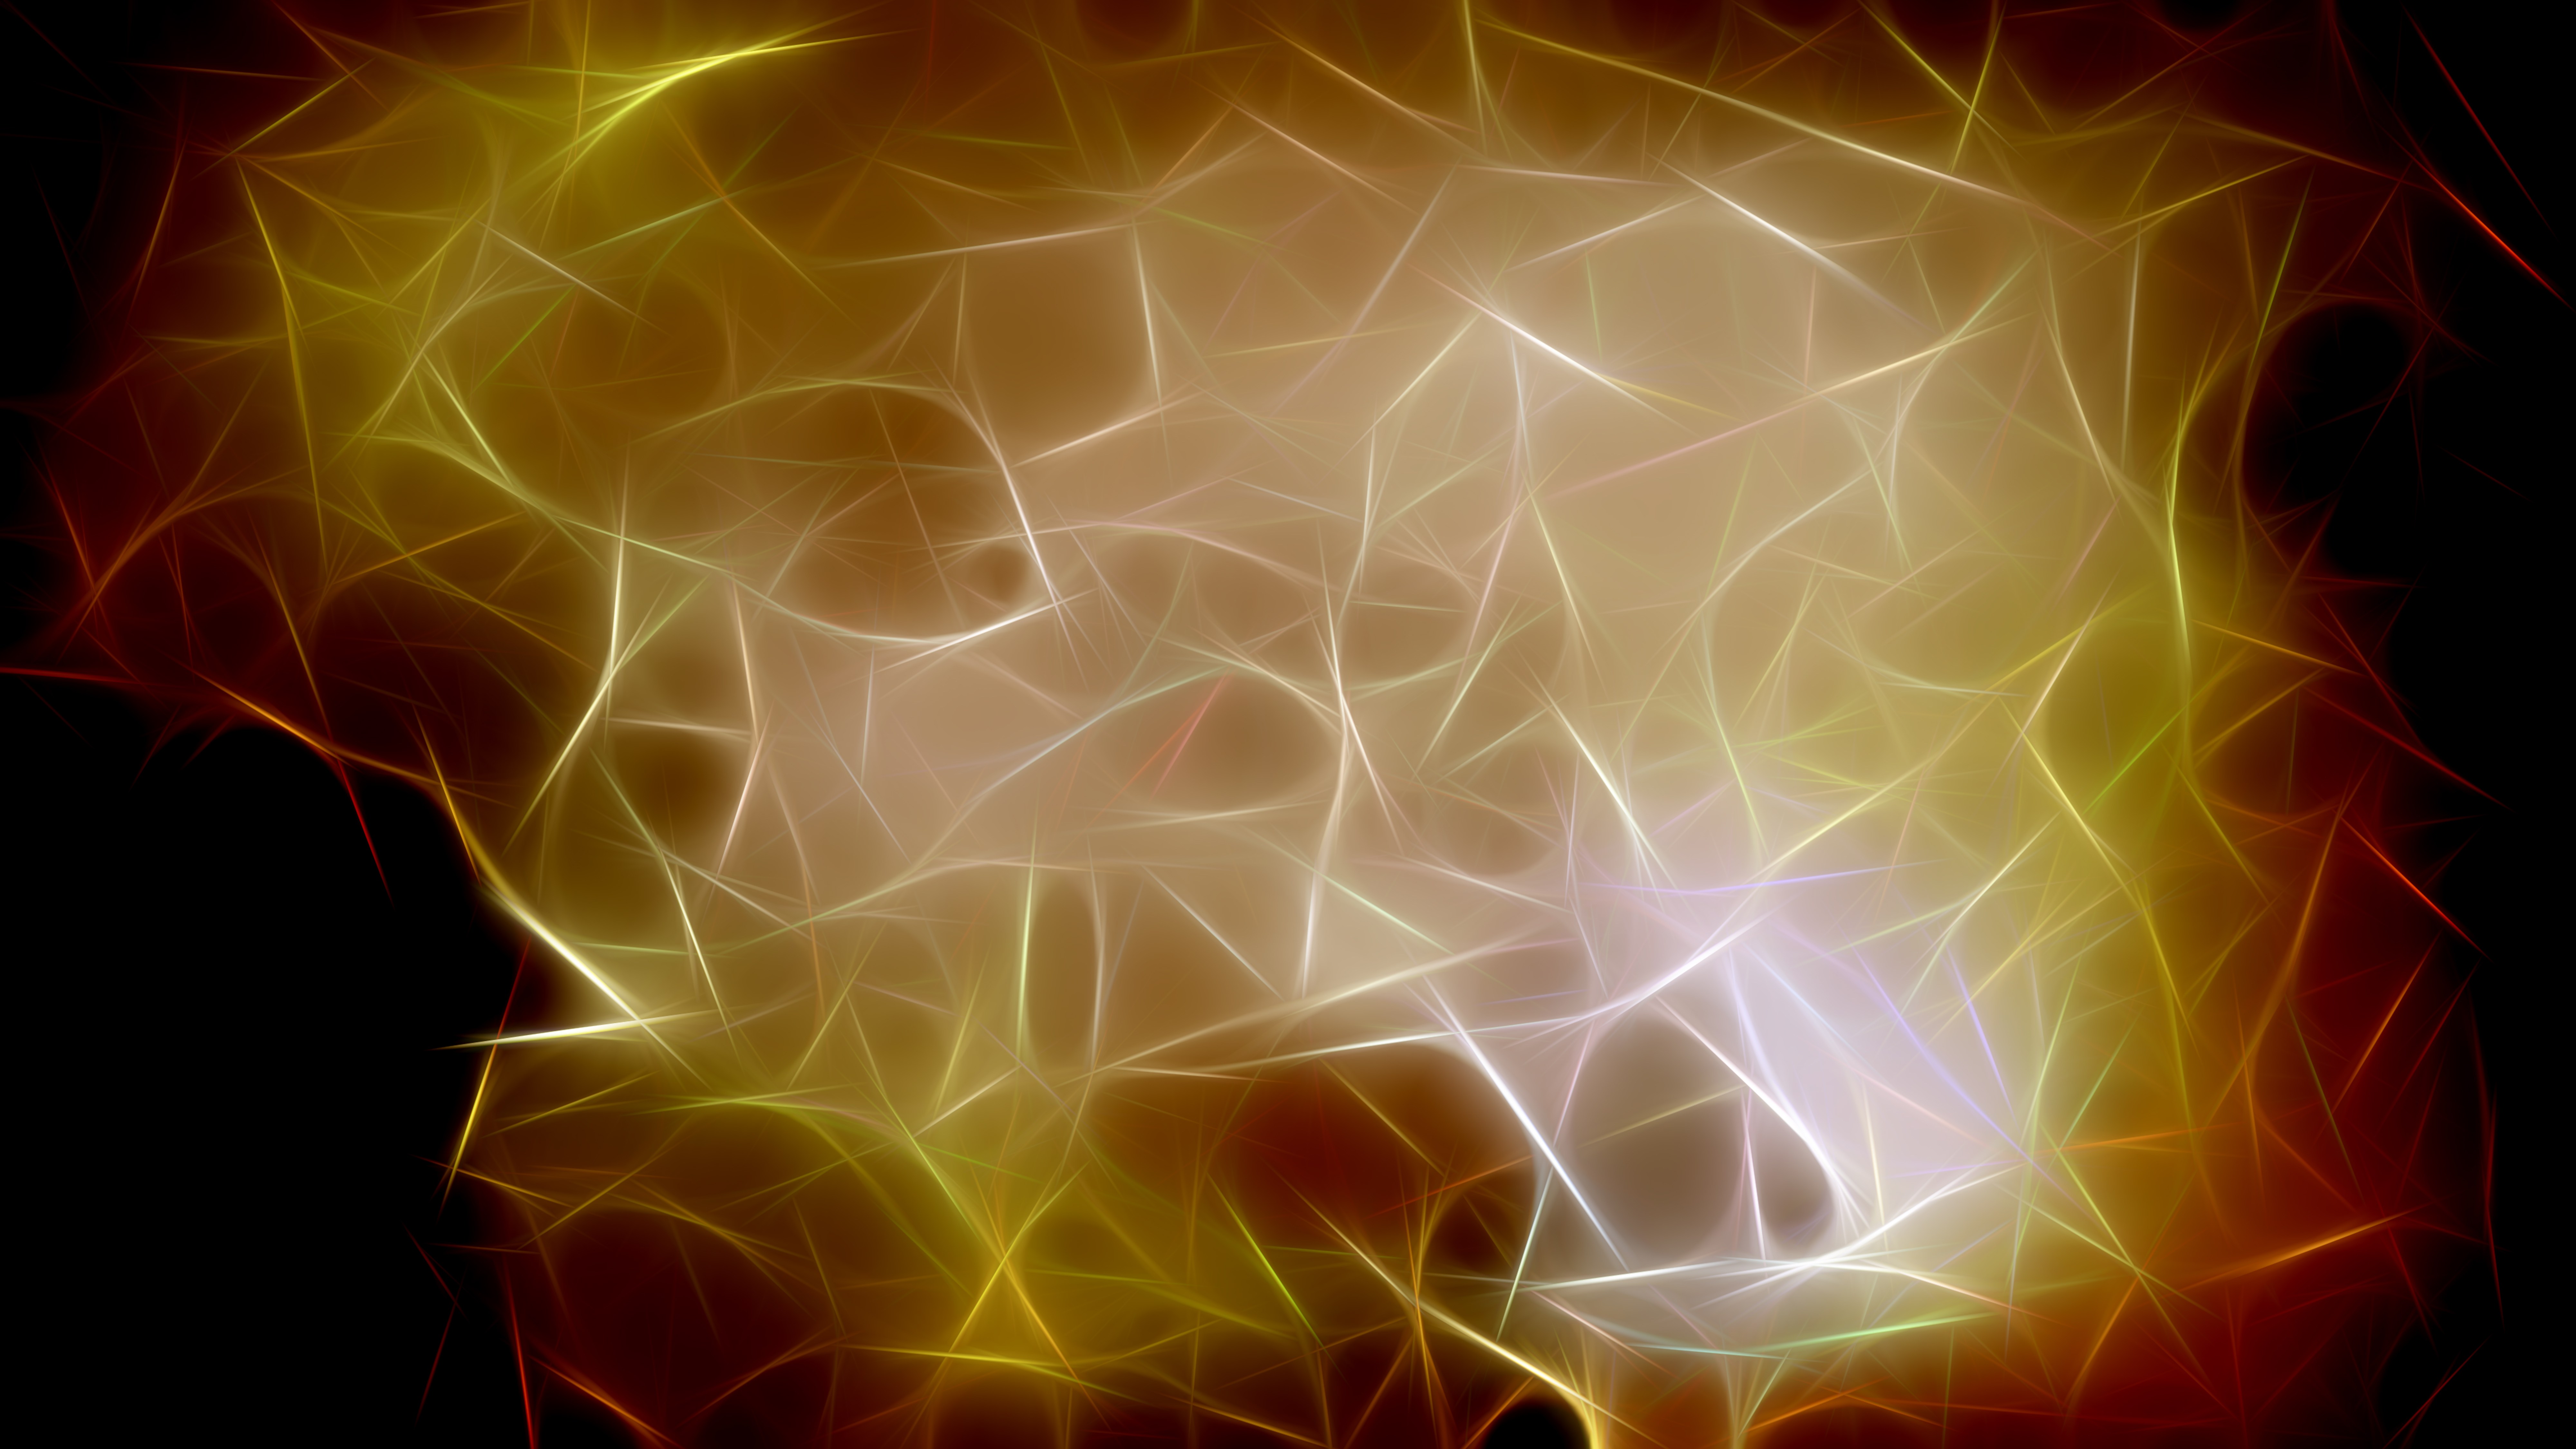 Red and Yellow Fractal Wallpaper Graphic